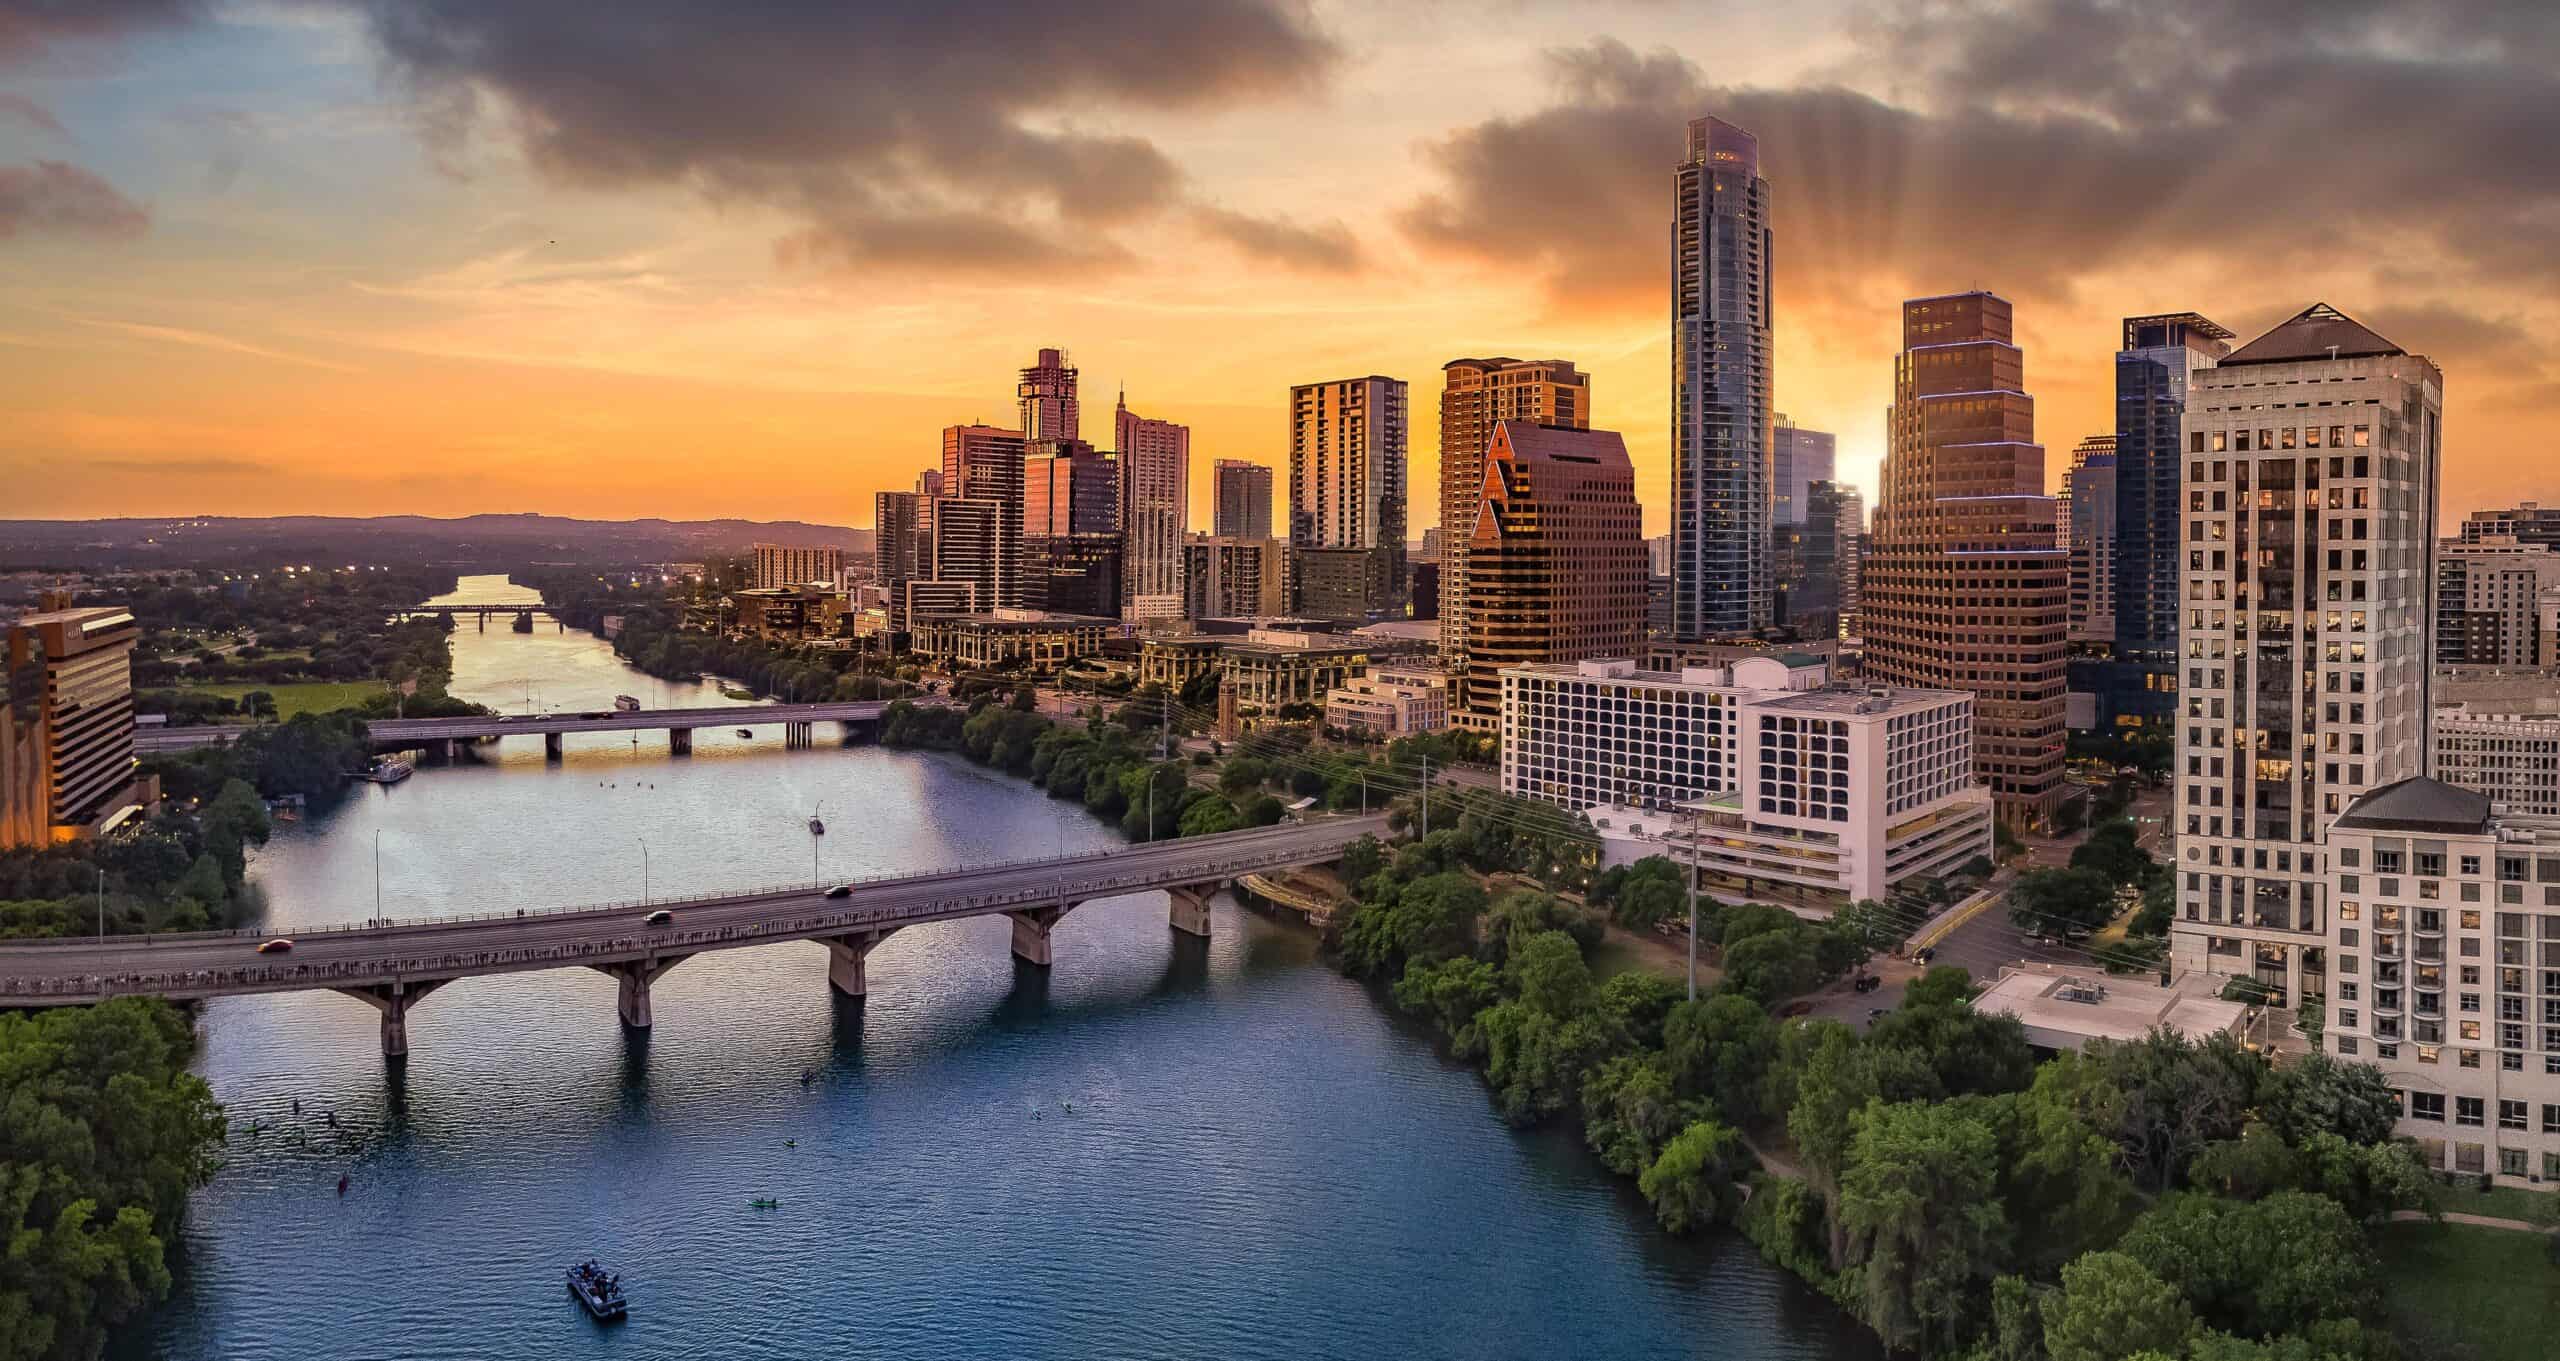 Austin, Texas | Downtown Austin Texas with capital and riverfront